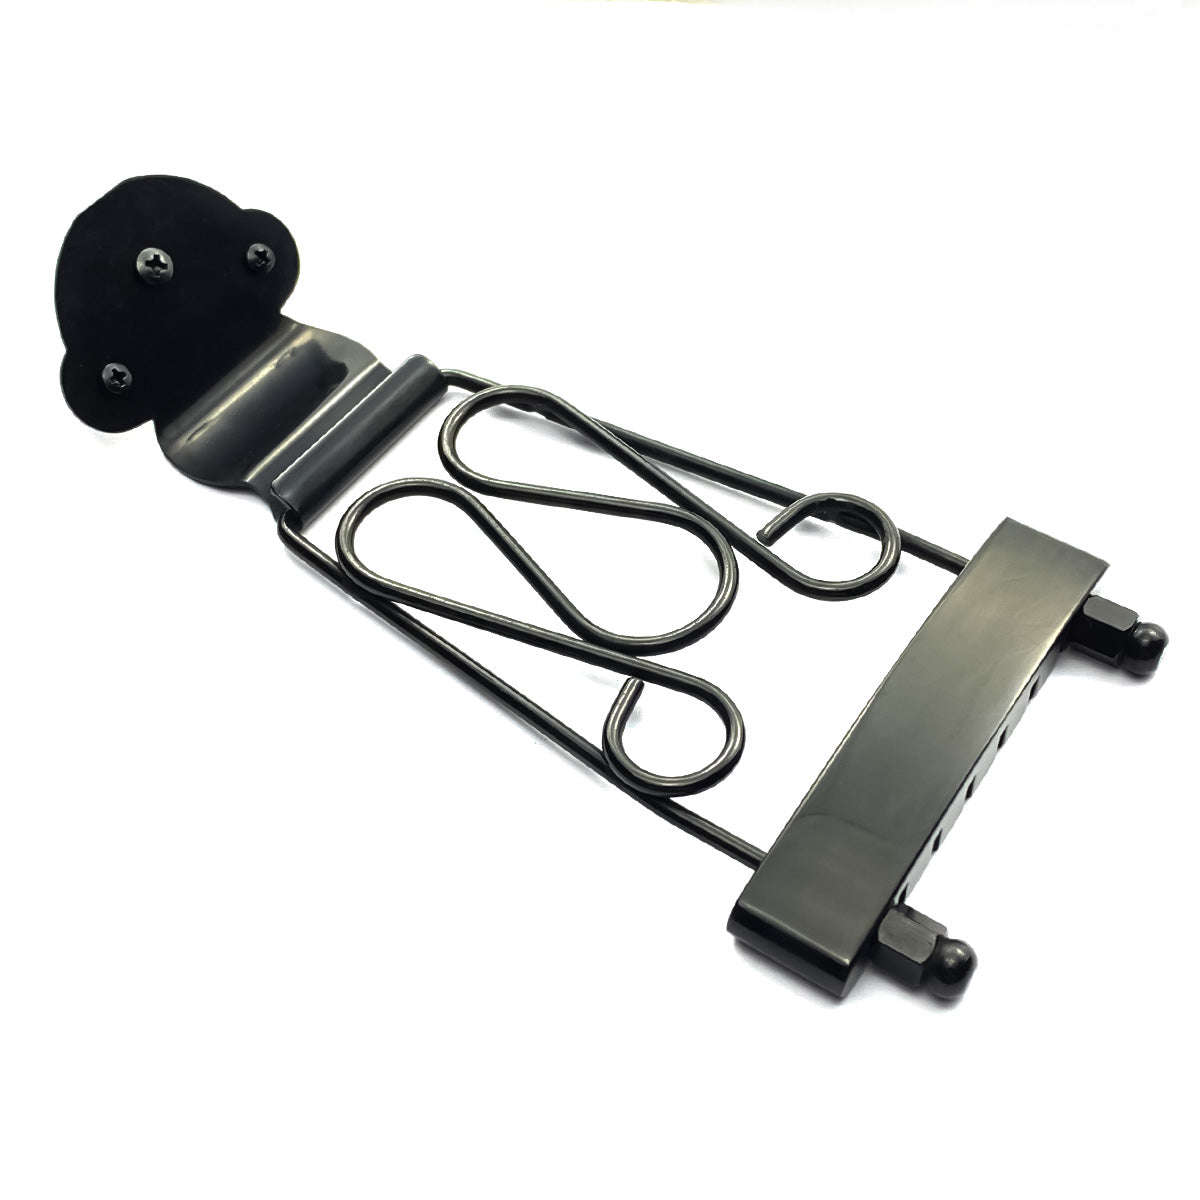 FLEOR Zinc Alloy Semi HollowArchtop Jazz Guitar Trapeze Tailpiece for 6-String Guitar. Black/Chrome/Gold Available